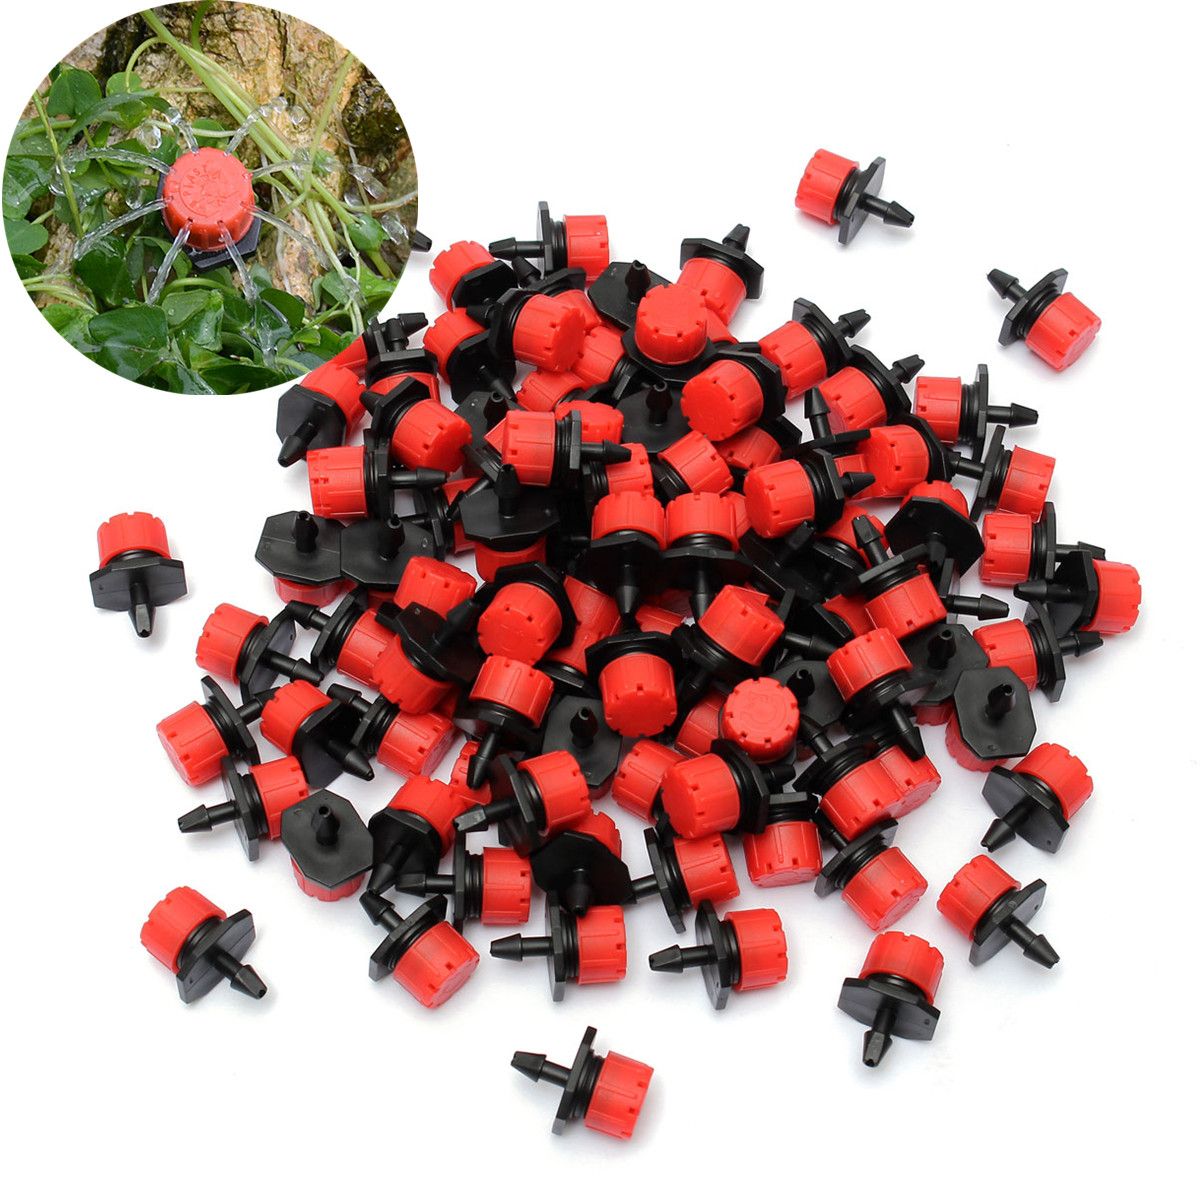 100Pcs-Adjustable-Micro-Drip-Irrigation-Watering-Emitter-Drippers-25-x-15cm-1298035